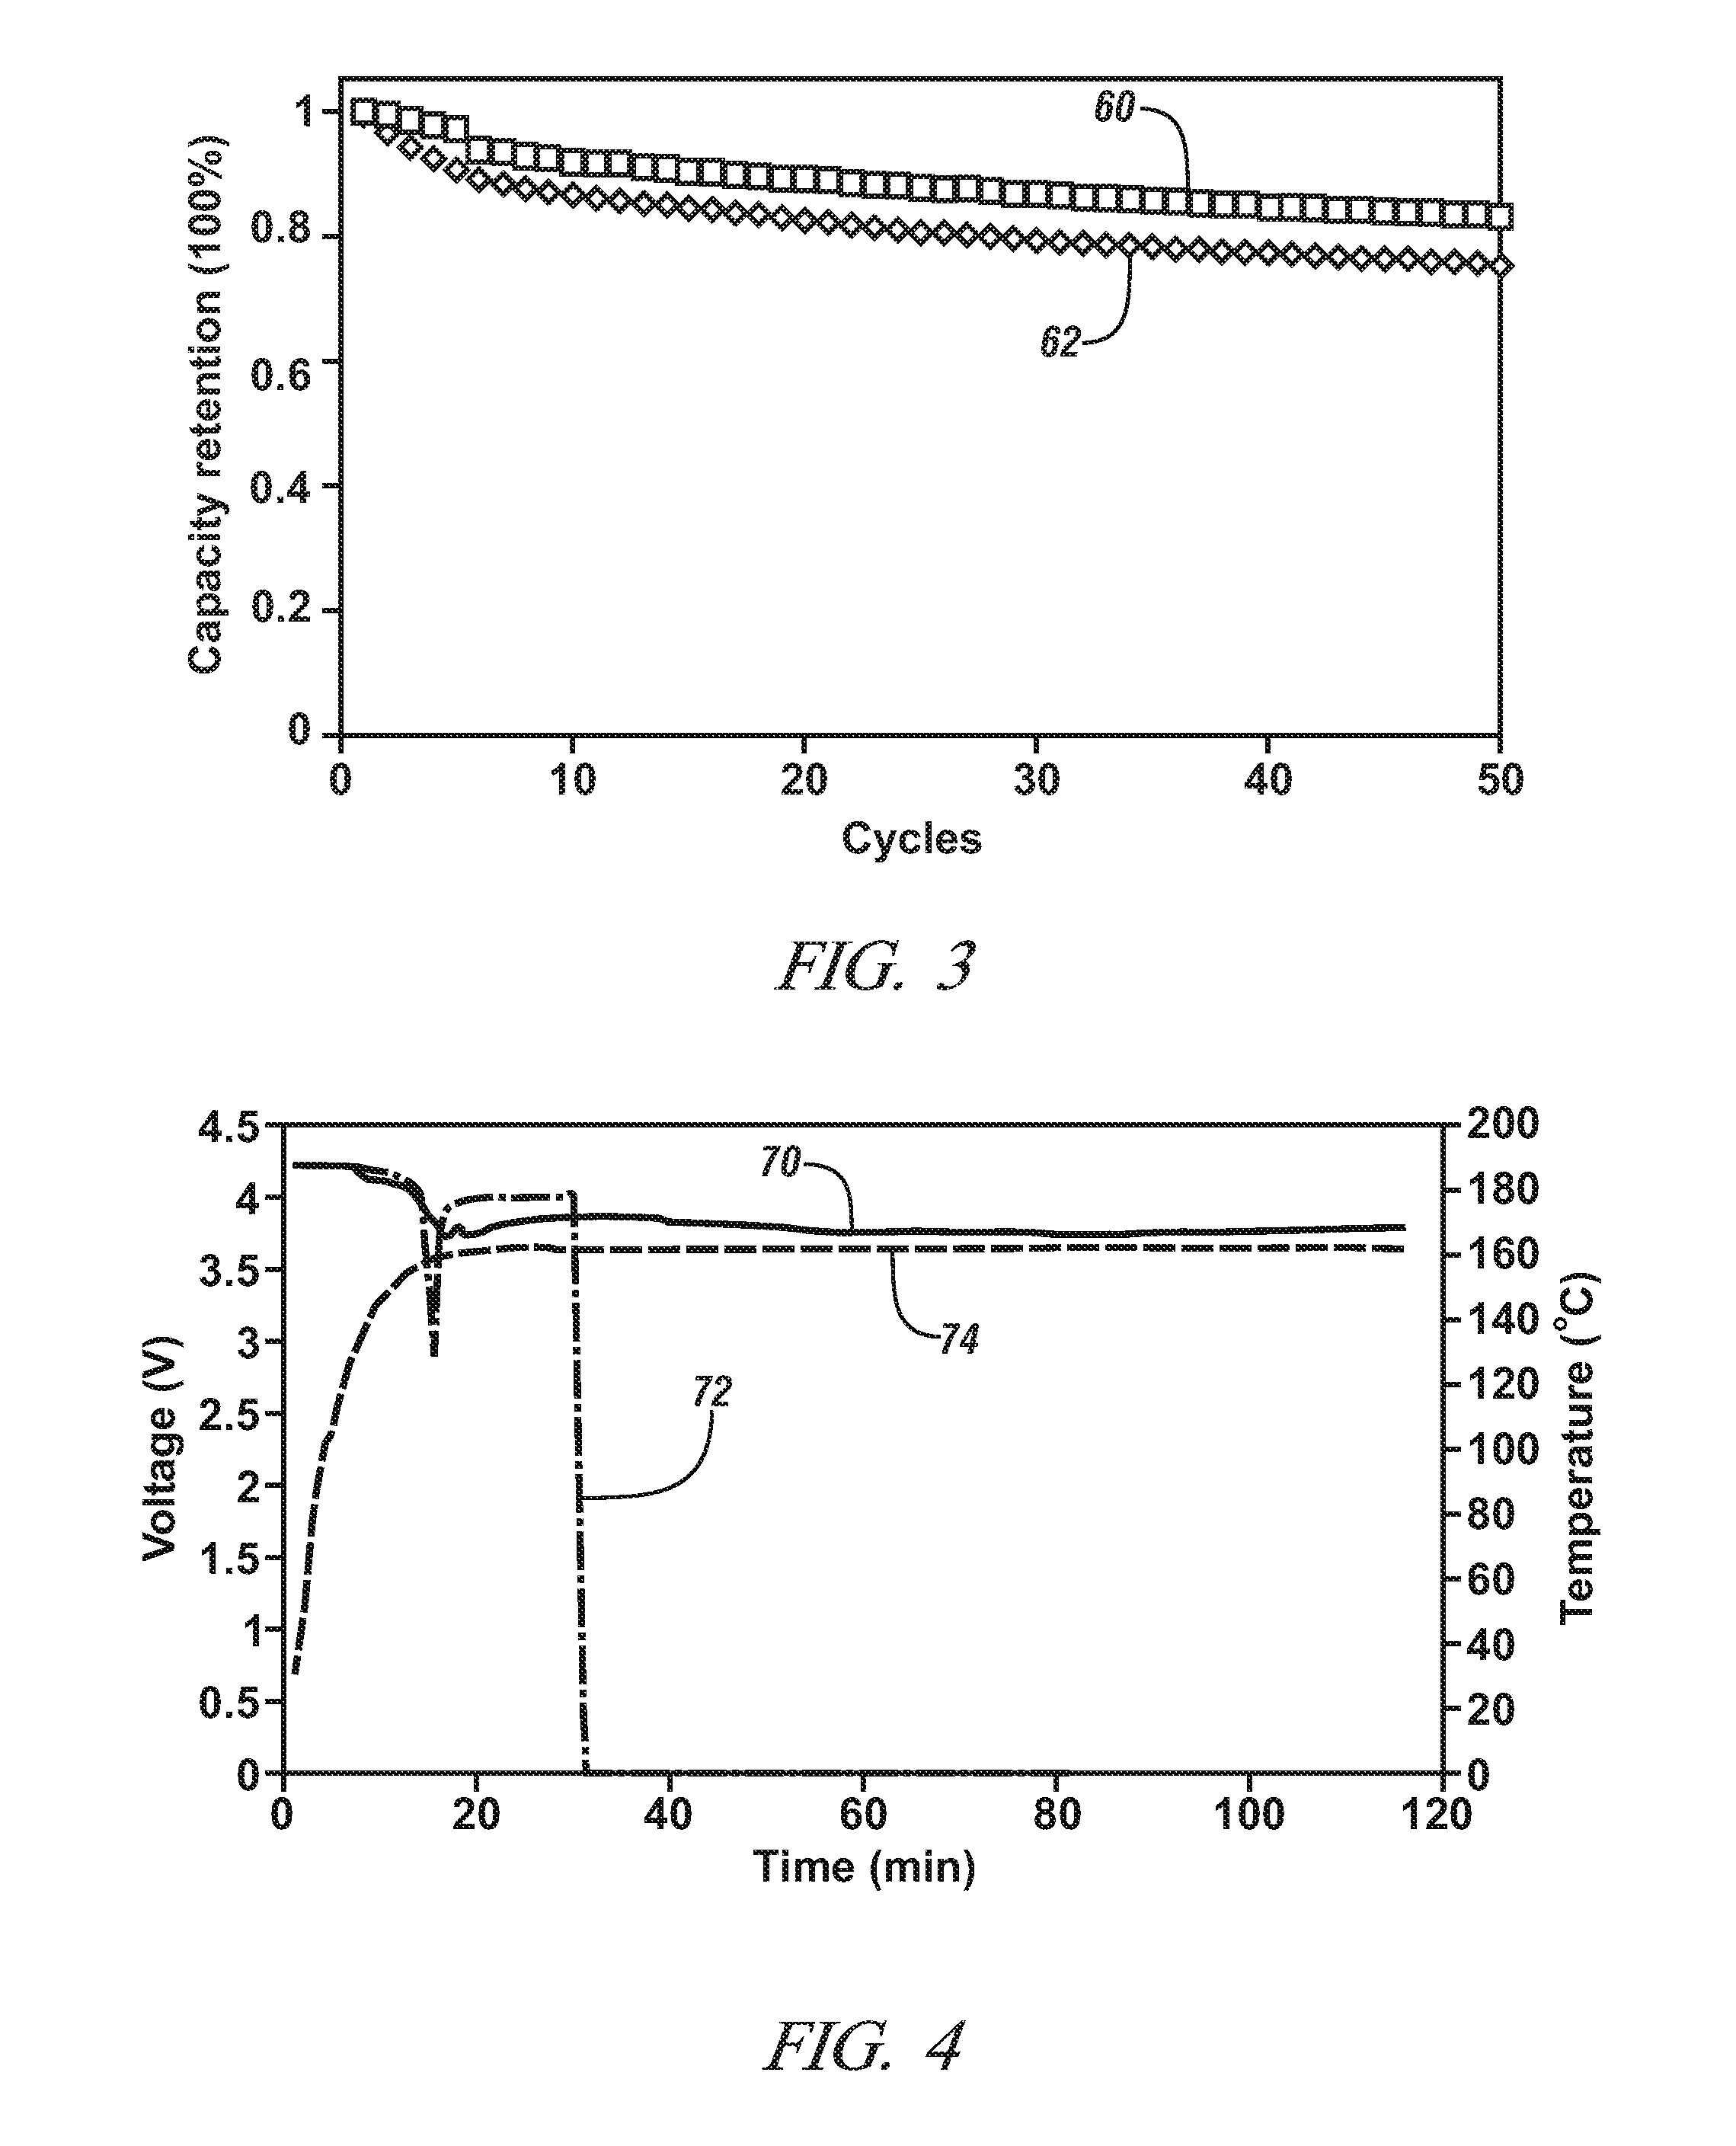 Separators for a lithium ion battery